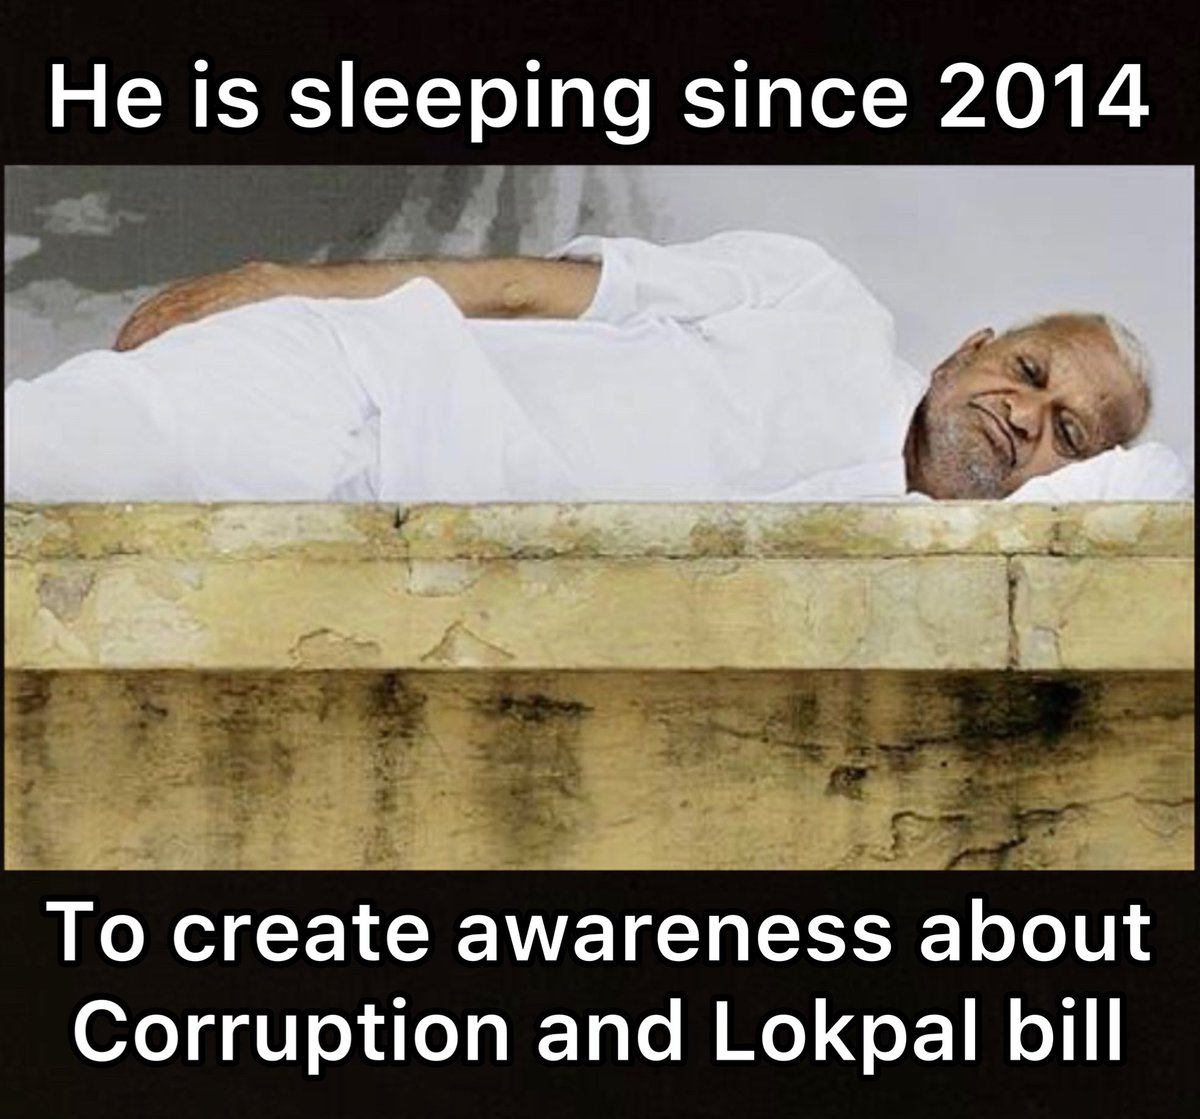 Modi abandoned his wife to create awareness about divorce.  
#AnnaHazare is sleeping since 2014 to create awareness about Corruption.
#poonampandey faked her death to create #cervicalcancerawareness 
Cheap People. Cheap Publicity Stunt.  #PoonamPandeyDeath  #CheapPublicity